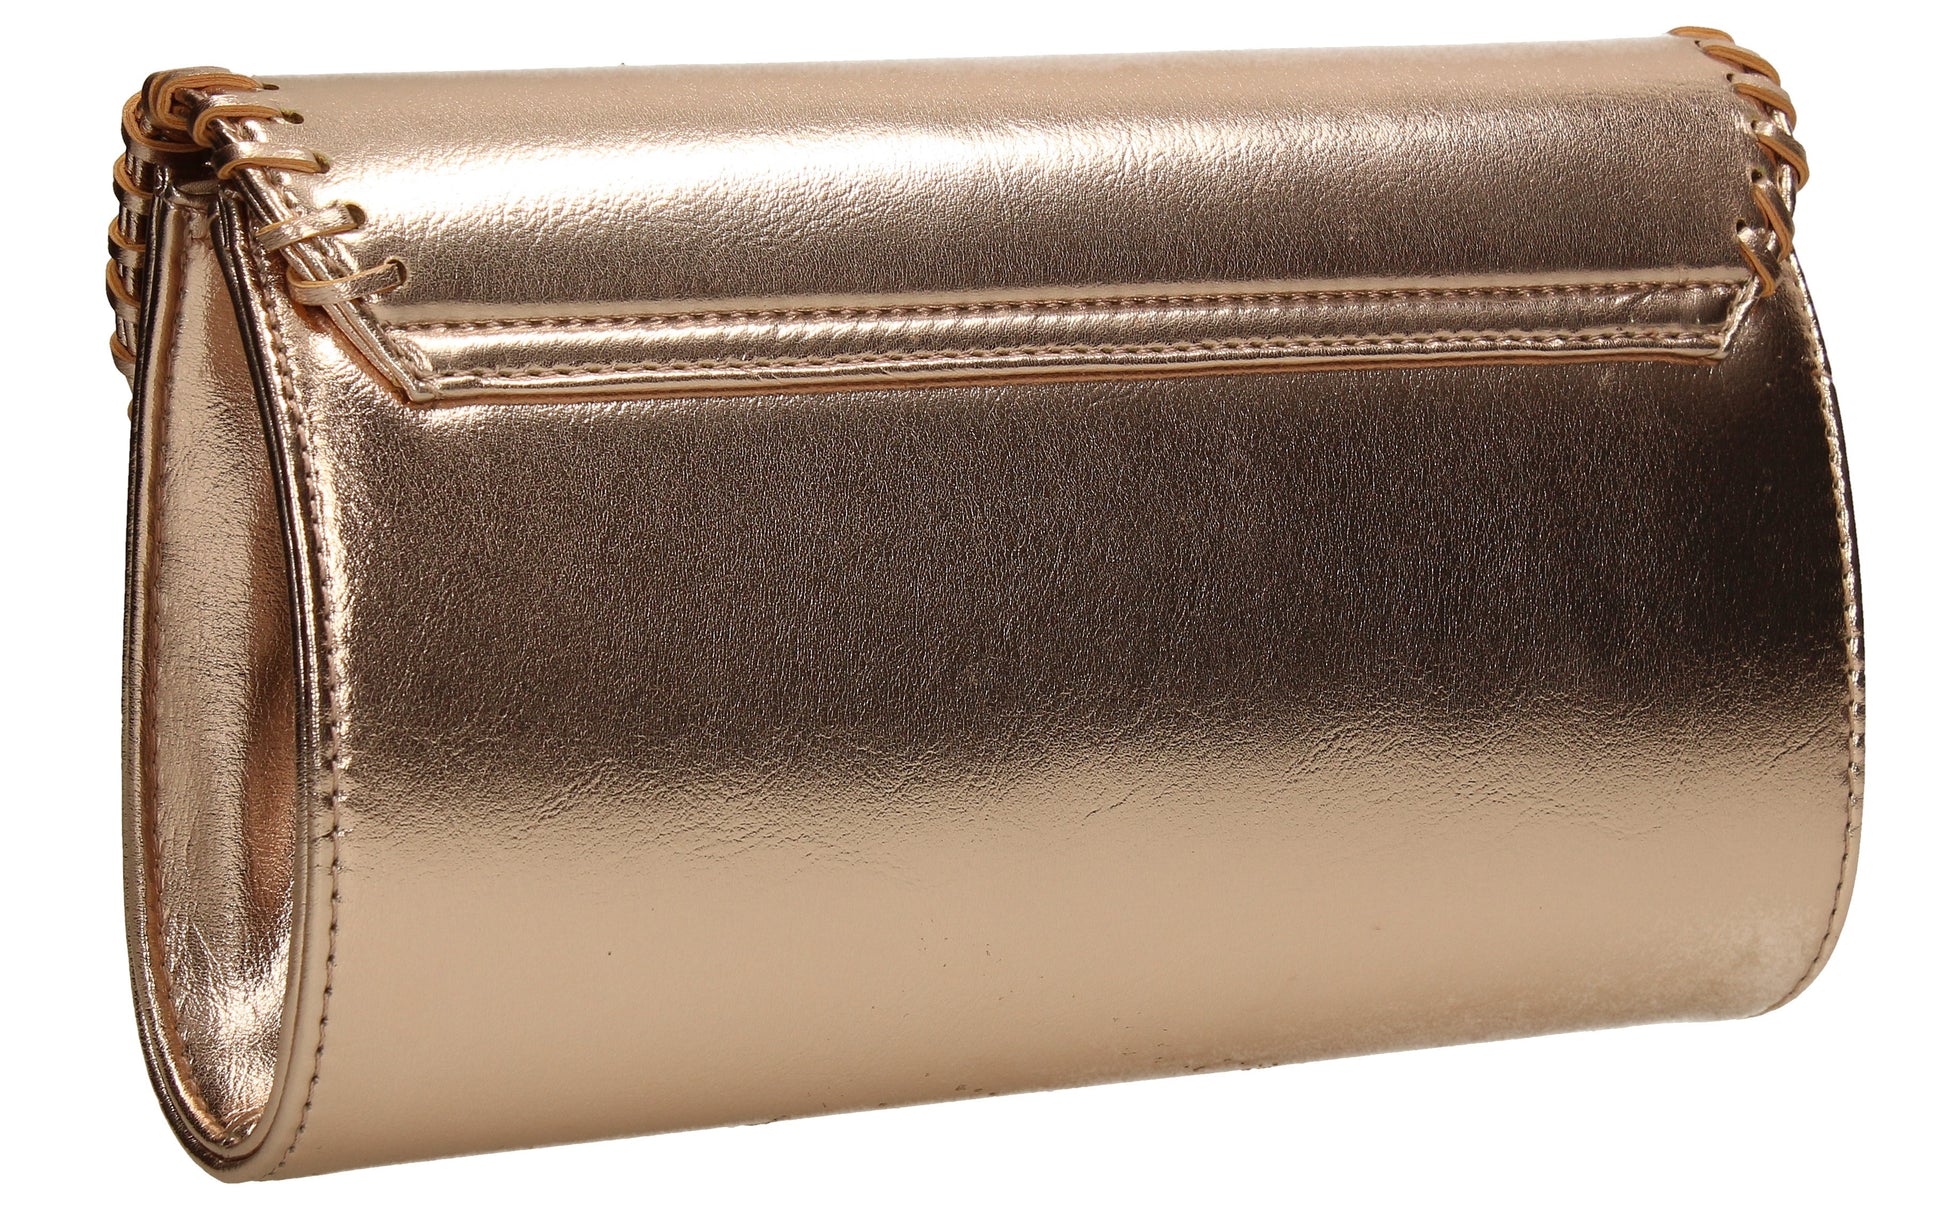 SWANKYSWANS Miller Clutch Bag Champagne Cute Cheap Clutch Bag For Weddings School and Work